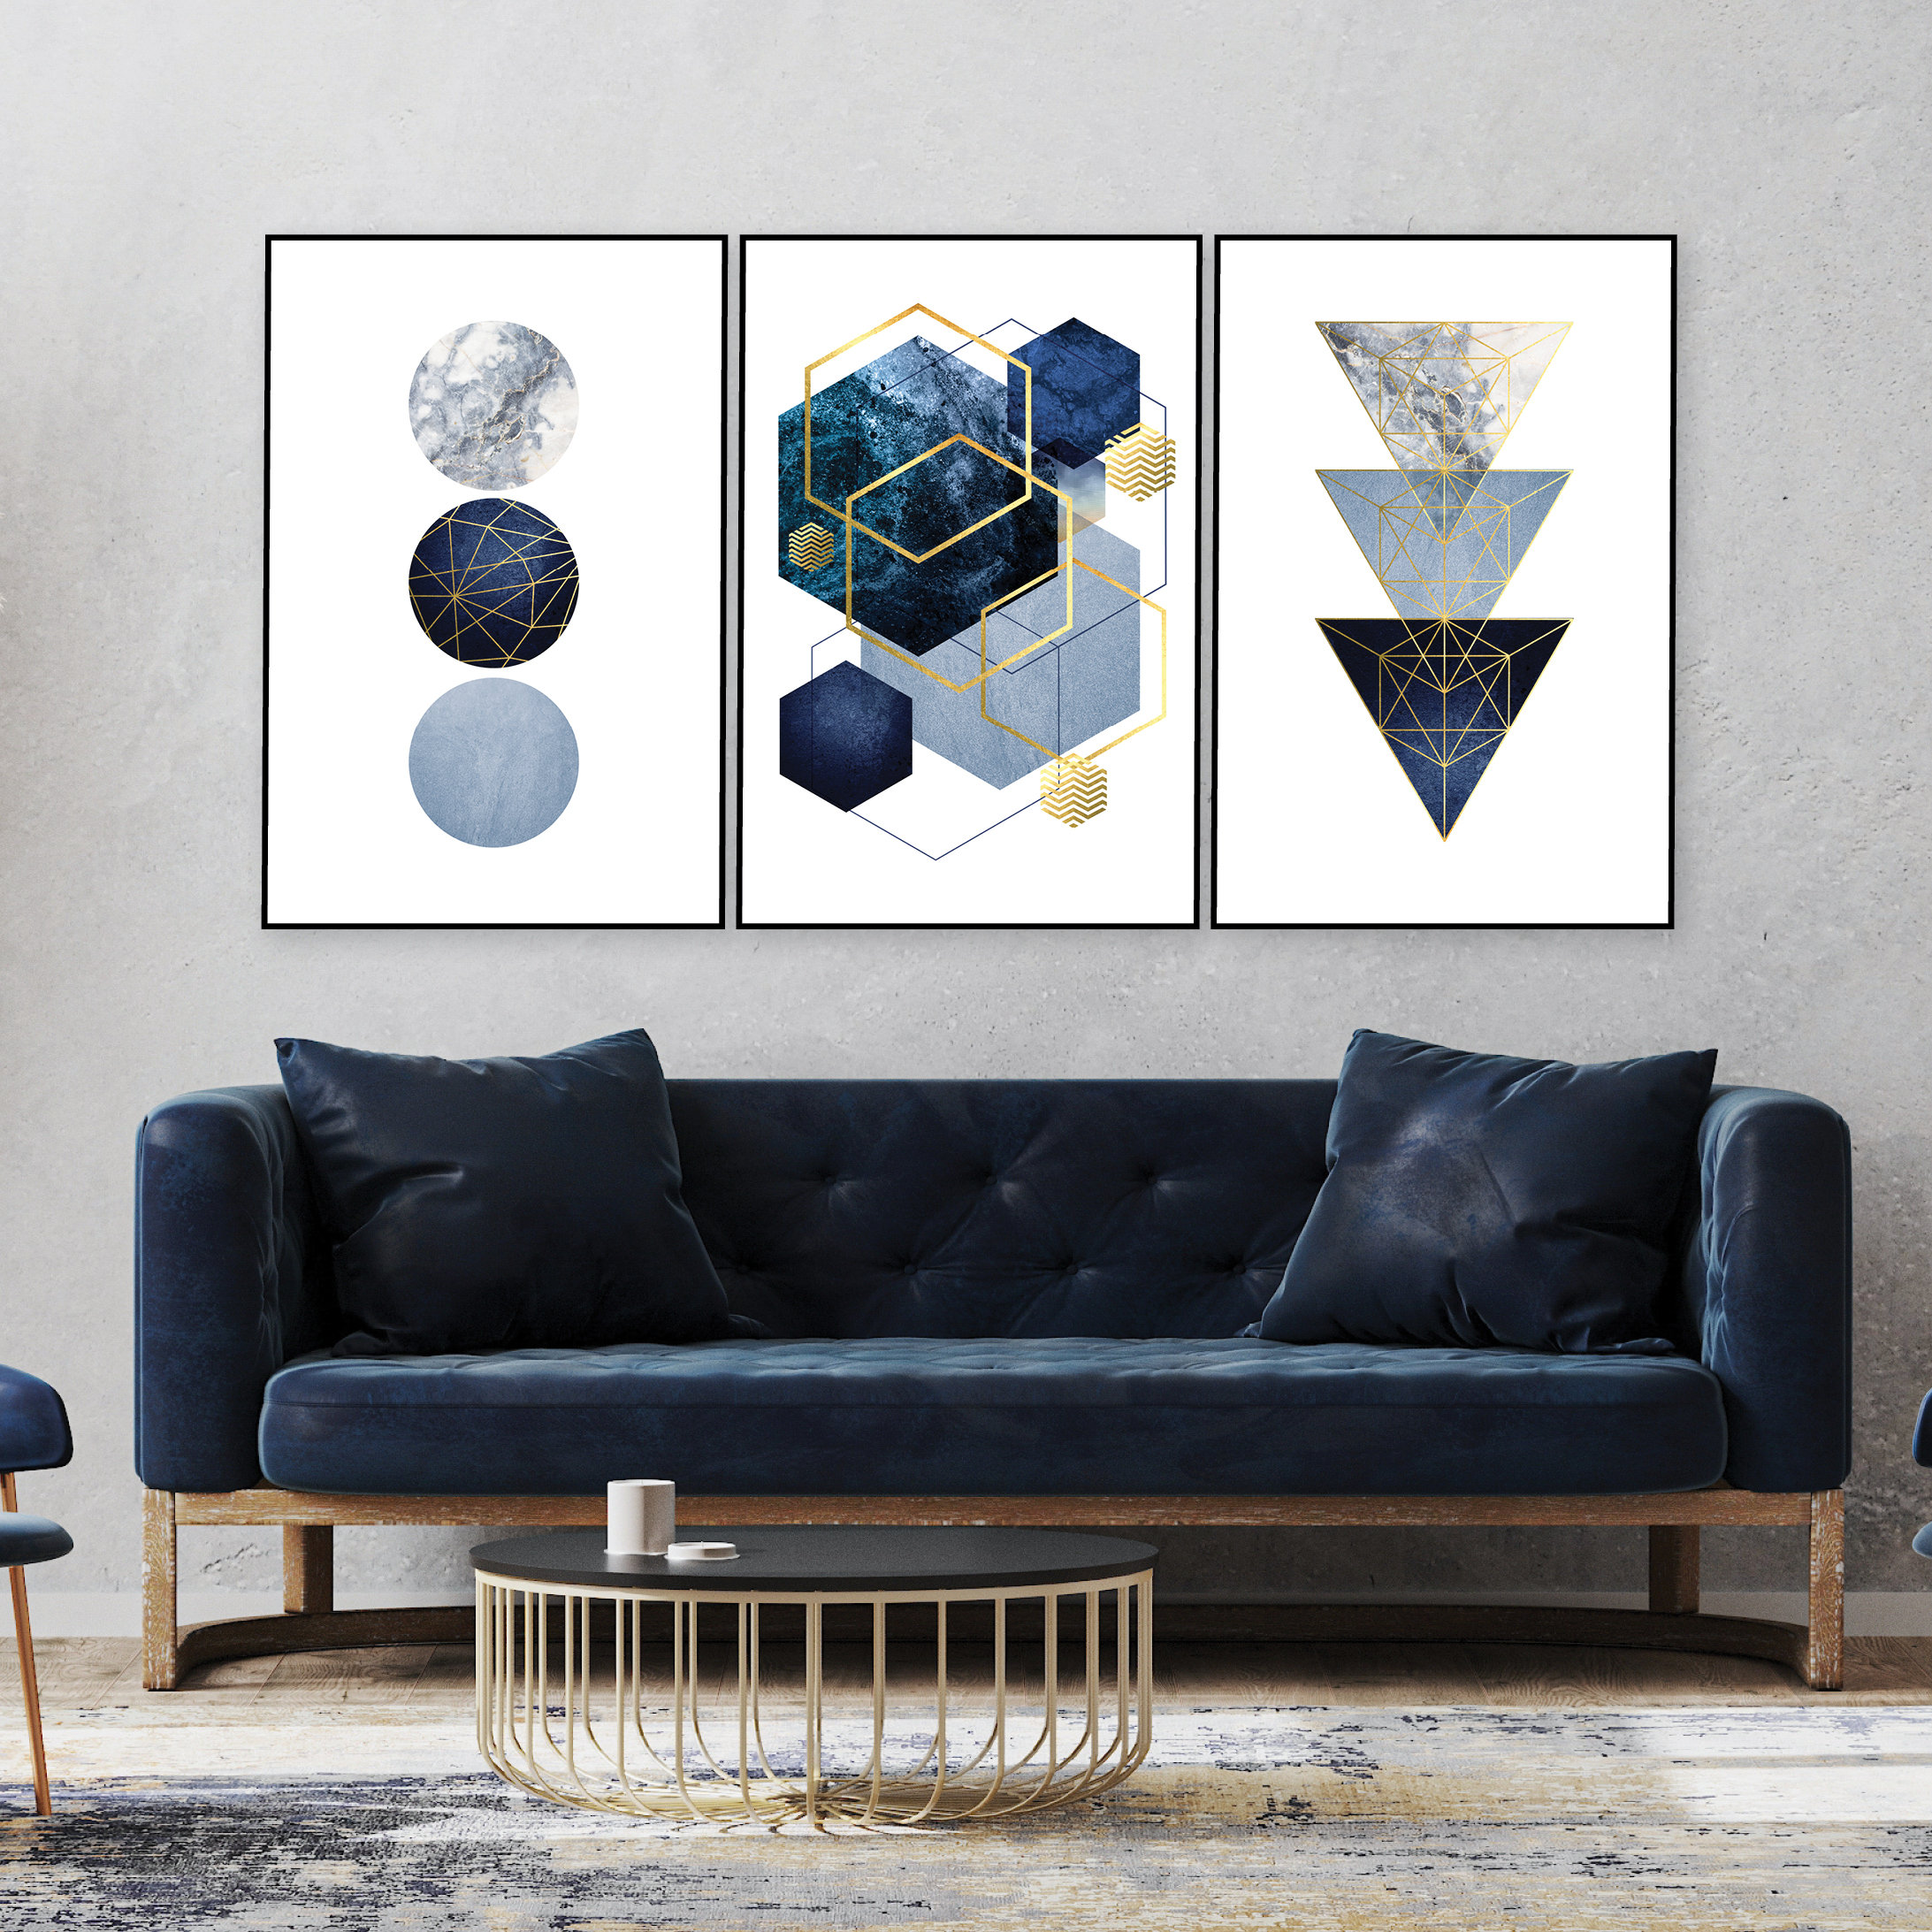 3 Minimalist Decor Downloadable Blue Wall Prints Posters A1 Etsy Set Download Download Instant Navy - Geometric Printable of Art Digital Art Gold